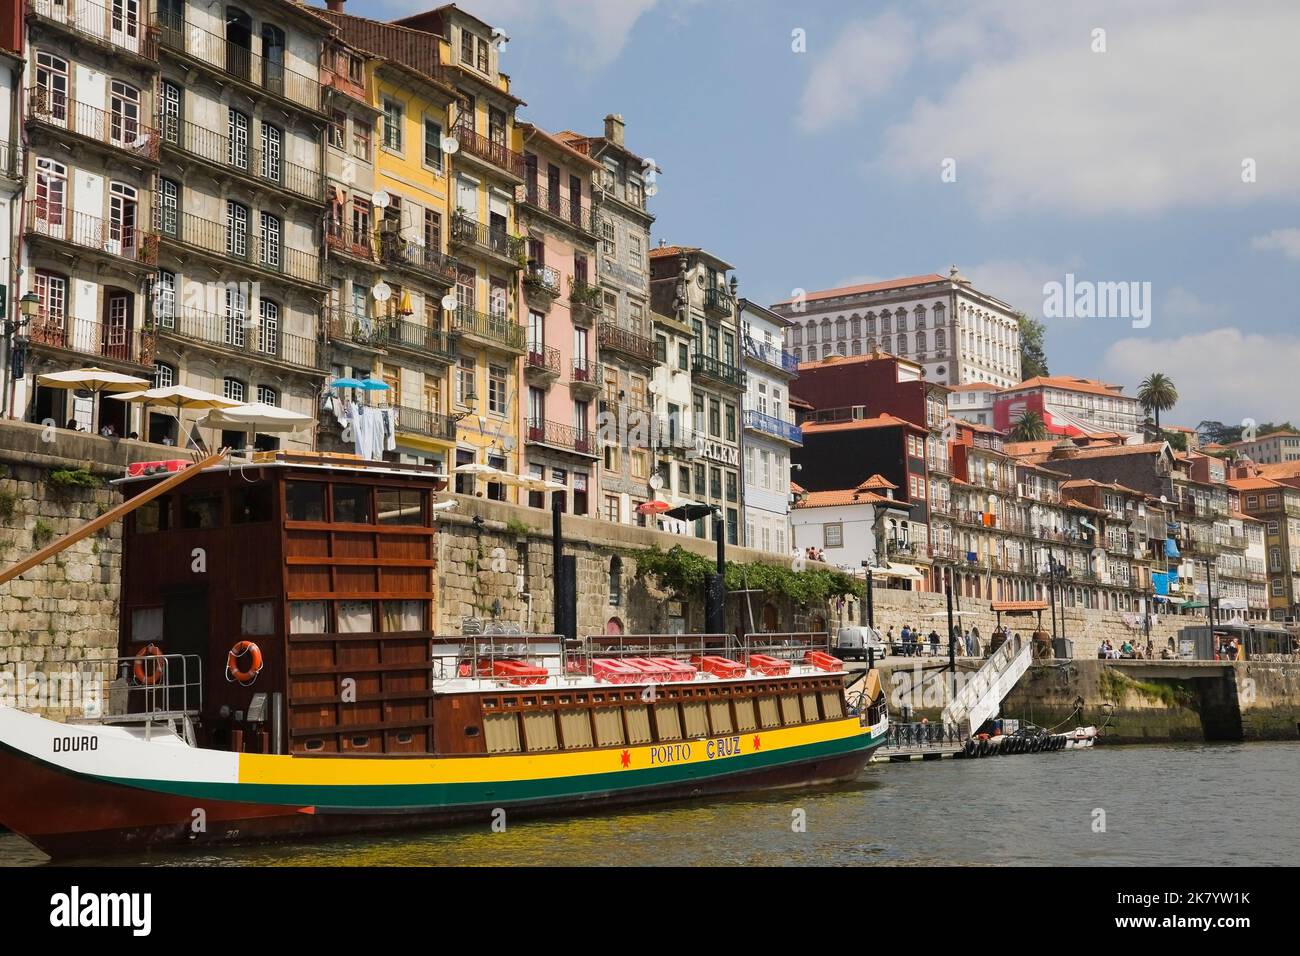 Residential apartment buildings in the old section of Porto overlooking the Douro river, Portugal. Stock Photo